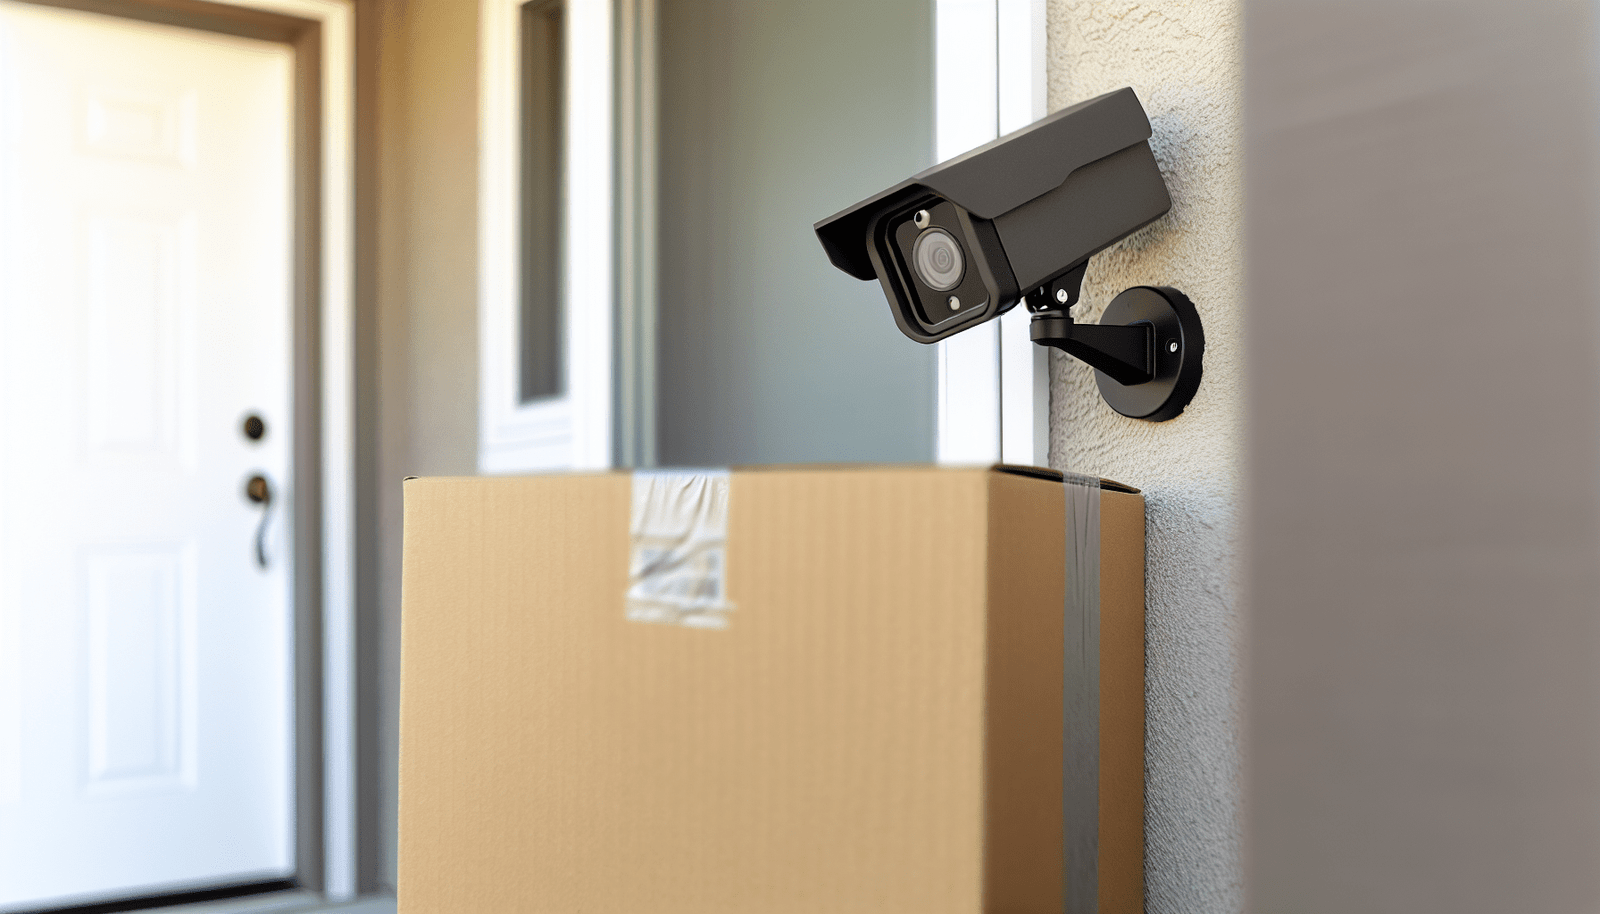 Security camera monitoring package delivery